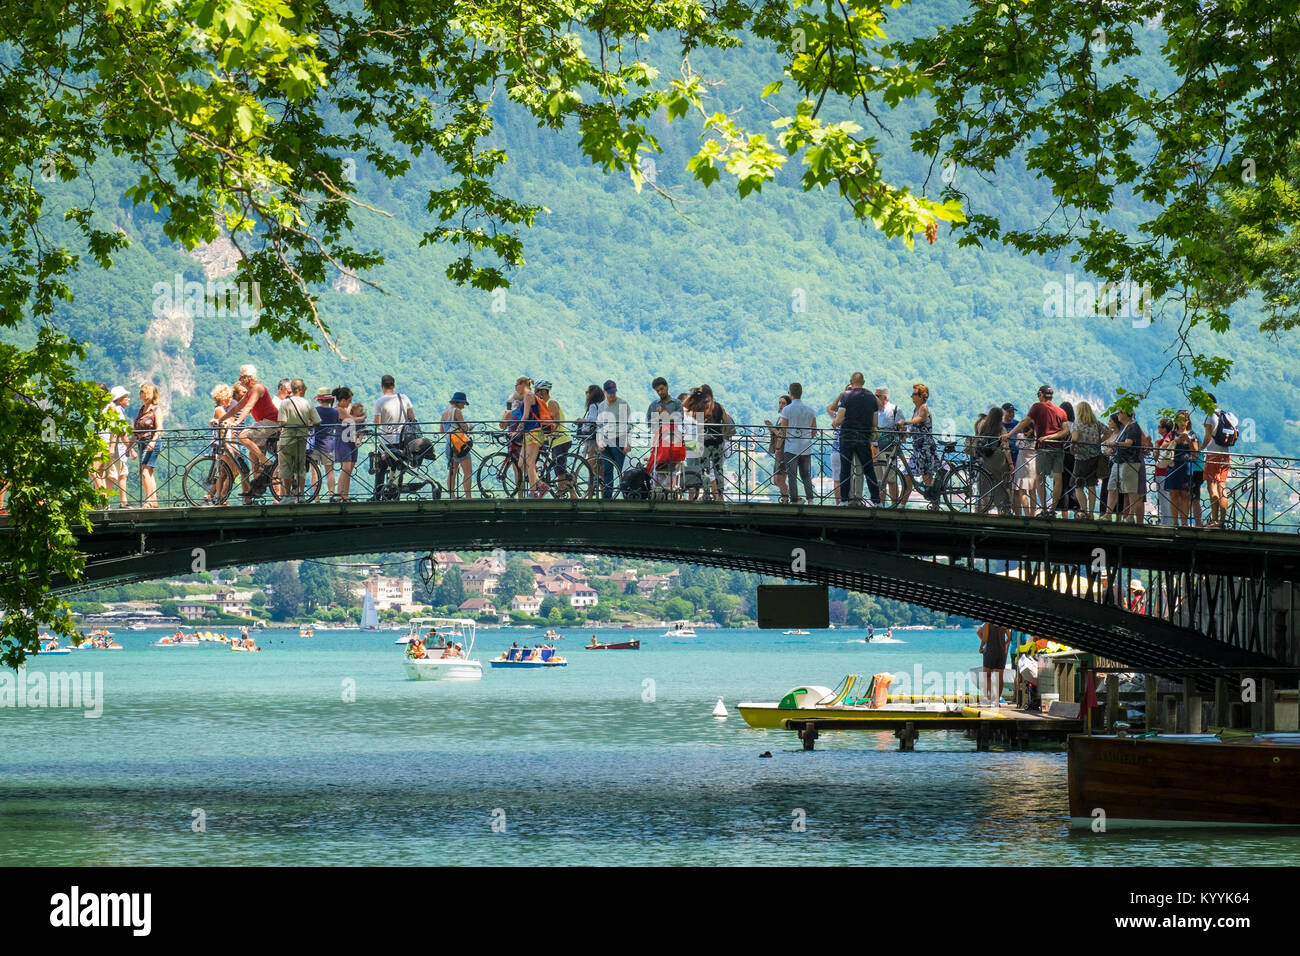 Lake Annecy - Tourists on the Pont des Amours - Lovers Bridge in Summer at Annecy Lake, Lac d'Annecy, Haute Savoie, France, Europe Stock Photo